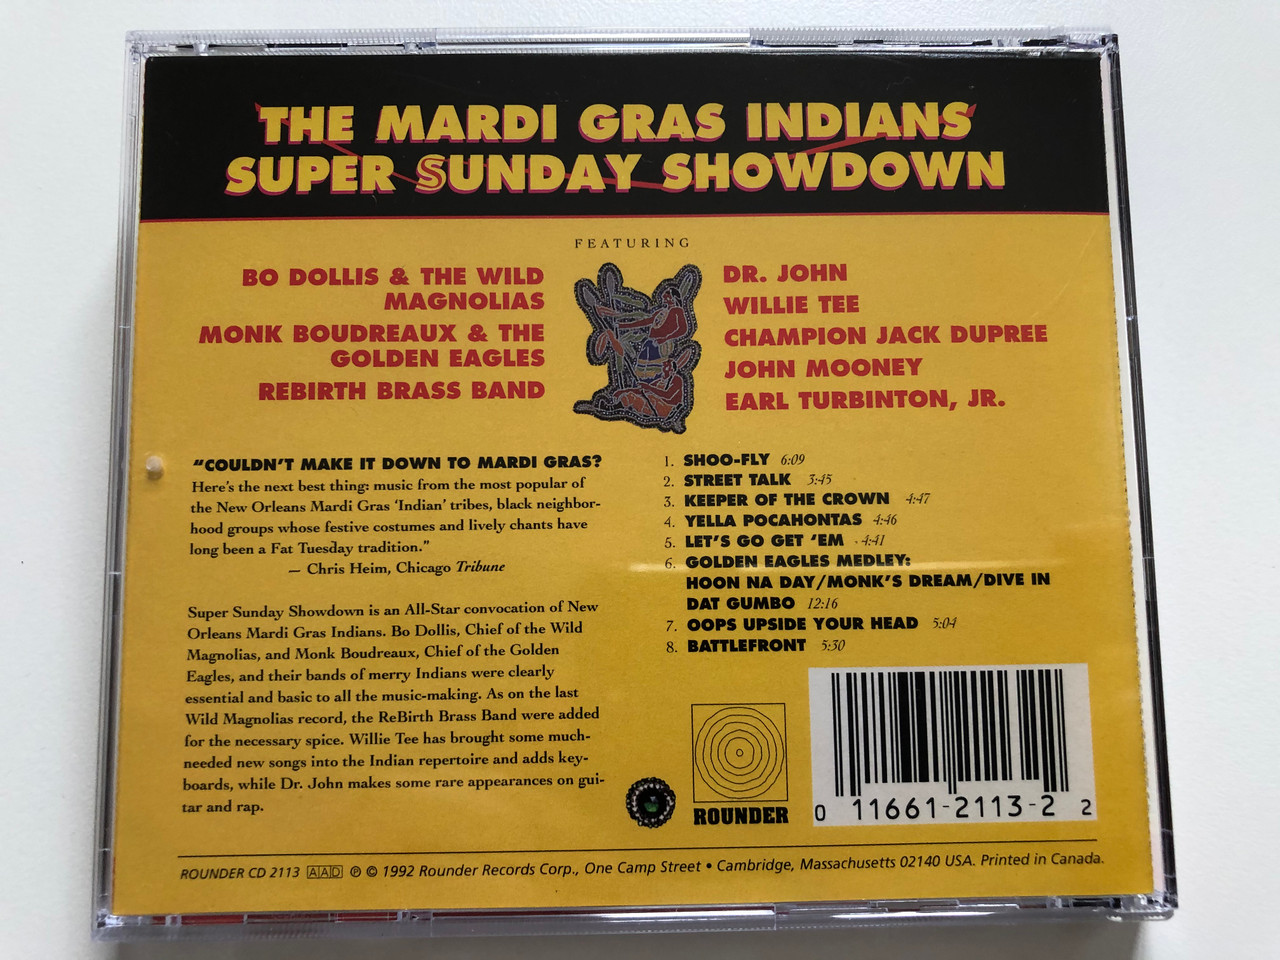 https://cdn10.bigcommerce.com/s-62bdpkt7pb/products/30293/images/179268/The_Mardi_Gras_Indians_Super_Sunday_Showdown_Featuring_Bo_Dollis_The_Wild_Magnolias_Monk_Boudreaux_The_Golden_Eagles_Rebirth_Brass_Band_Dr._John_Willie_Tee_Rounder_Records_Audio_C_6__33472.1622100282.1280.1280.JPG?c=2&_ga=2.253380745.124754382.1622221975-1131994027.1622221975